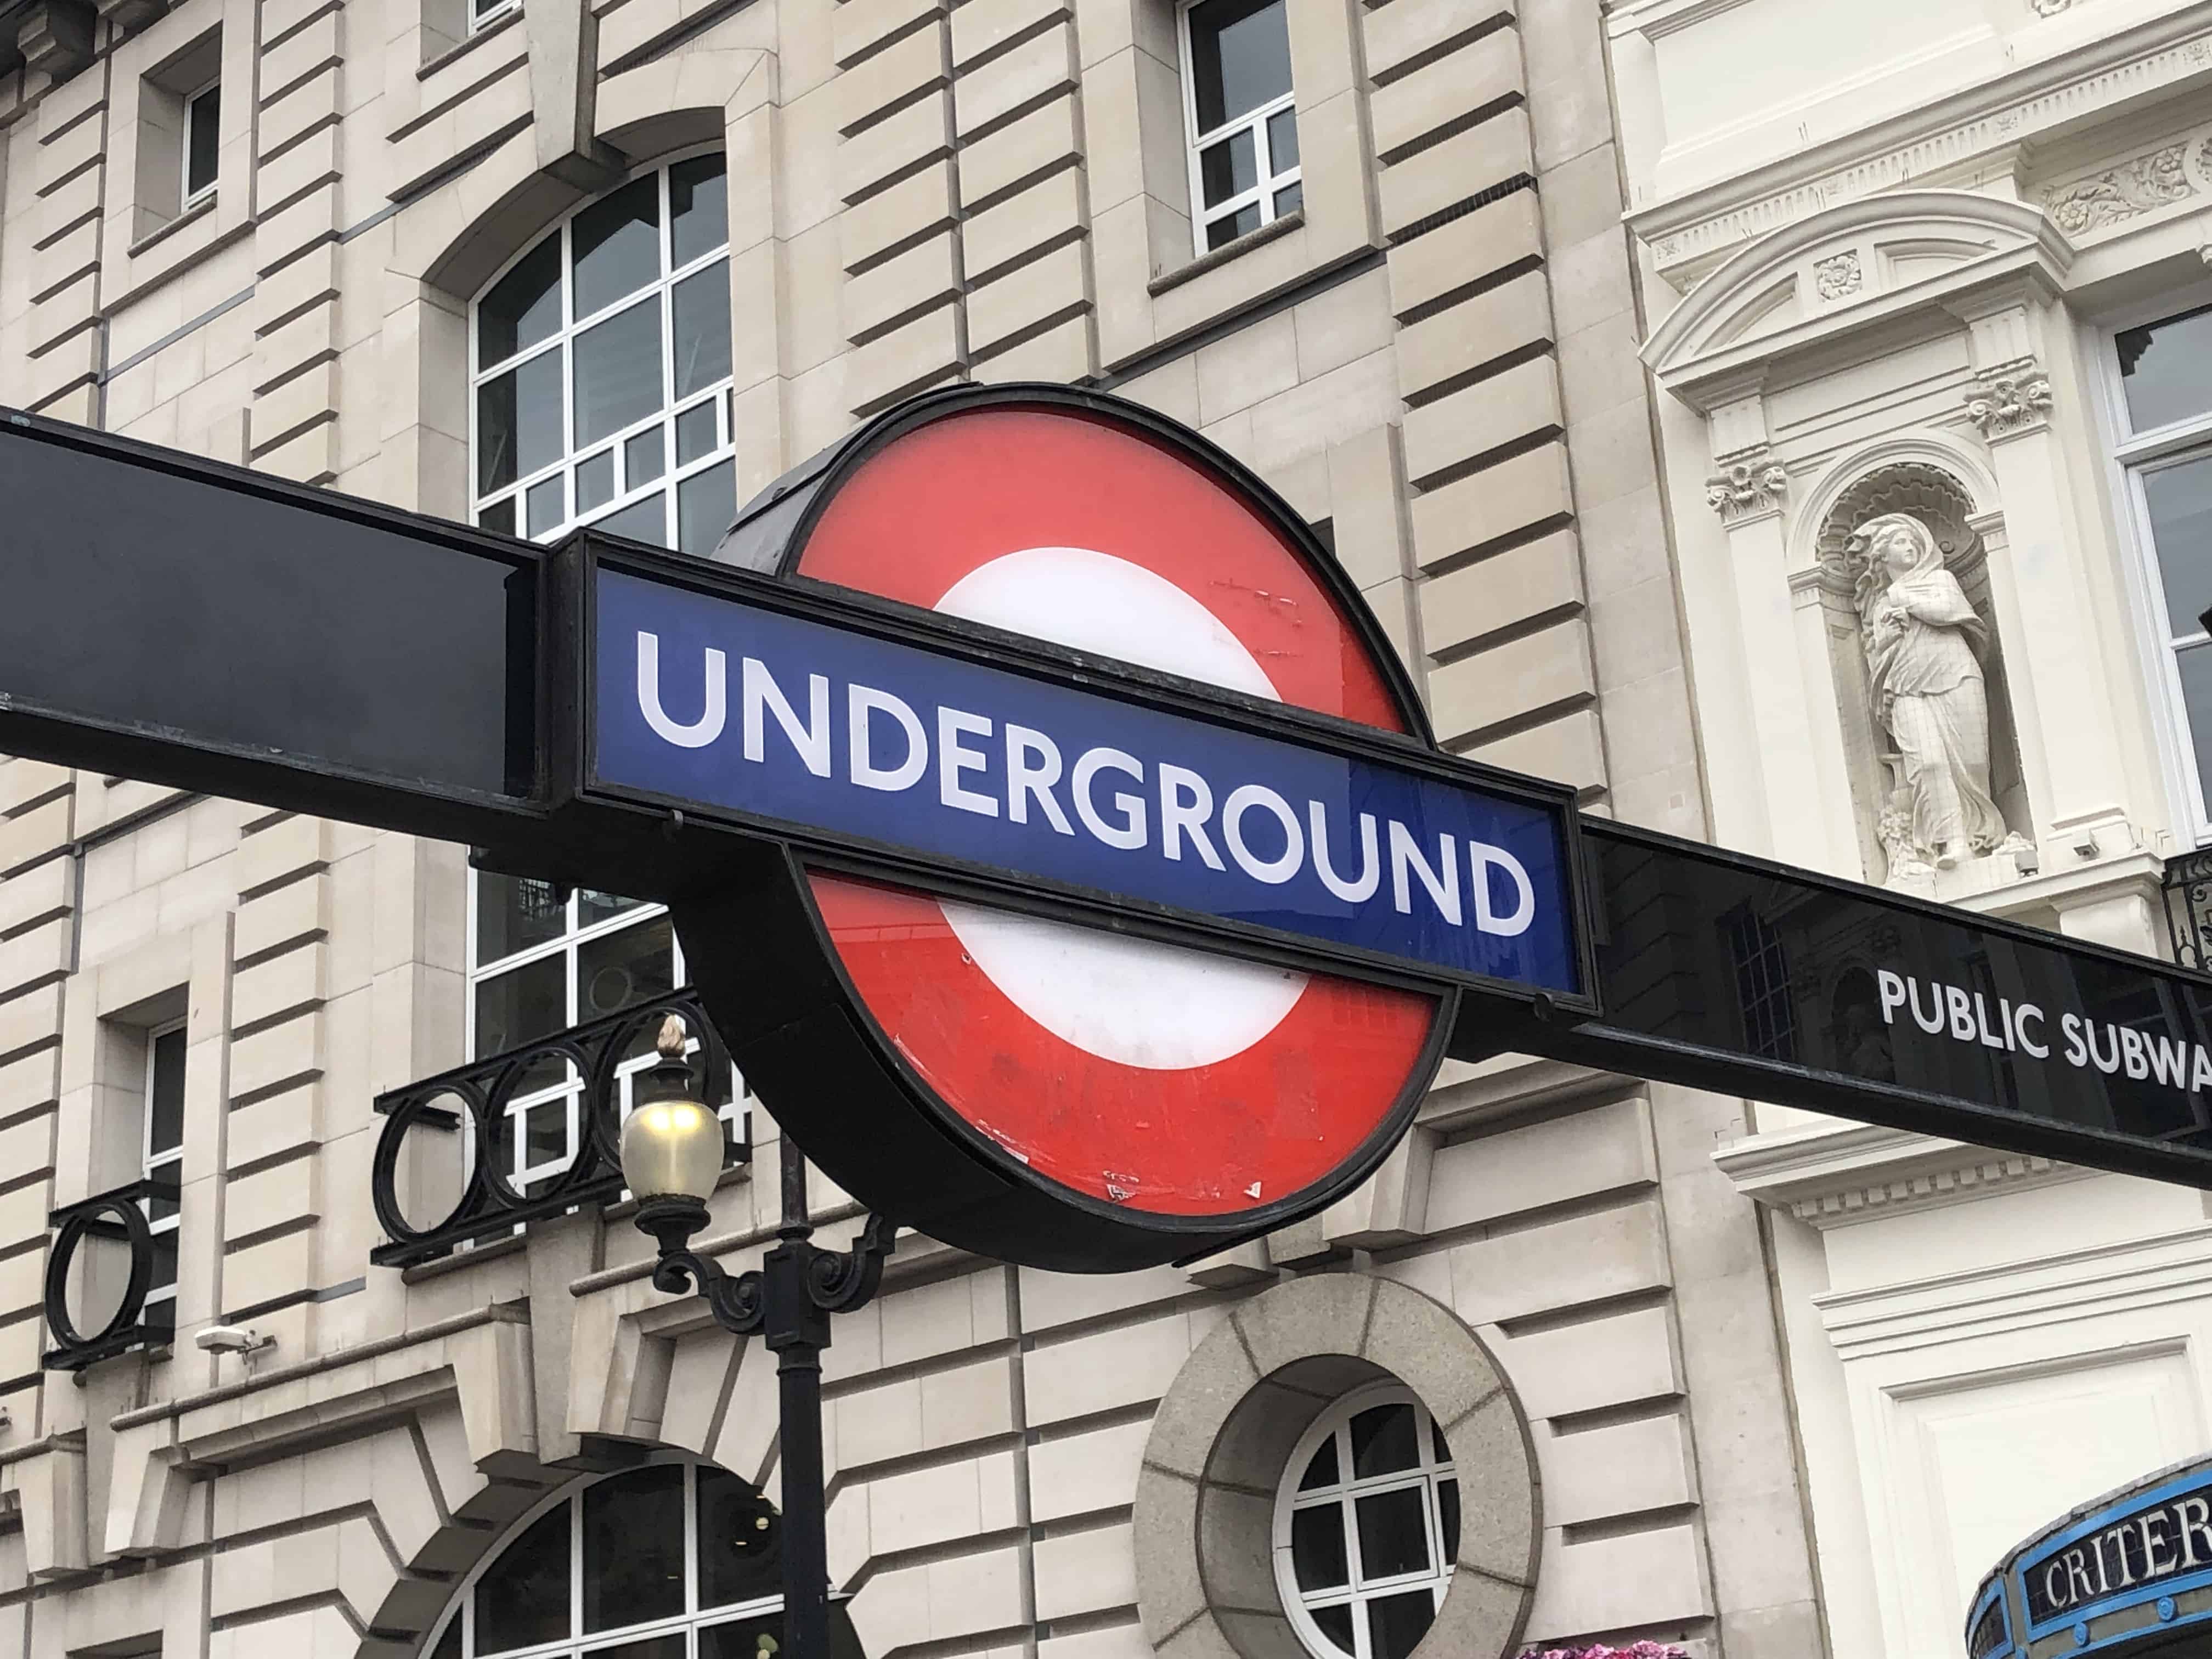 Sign for the Underground at Piccadilly Circus